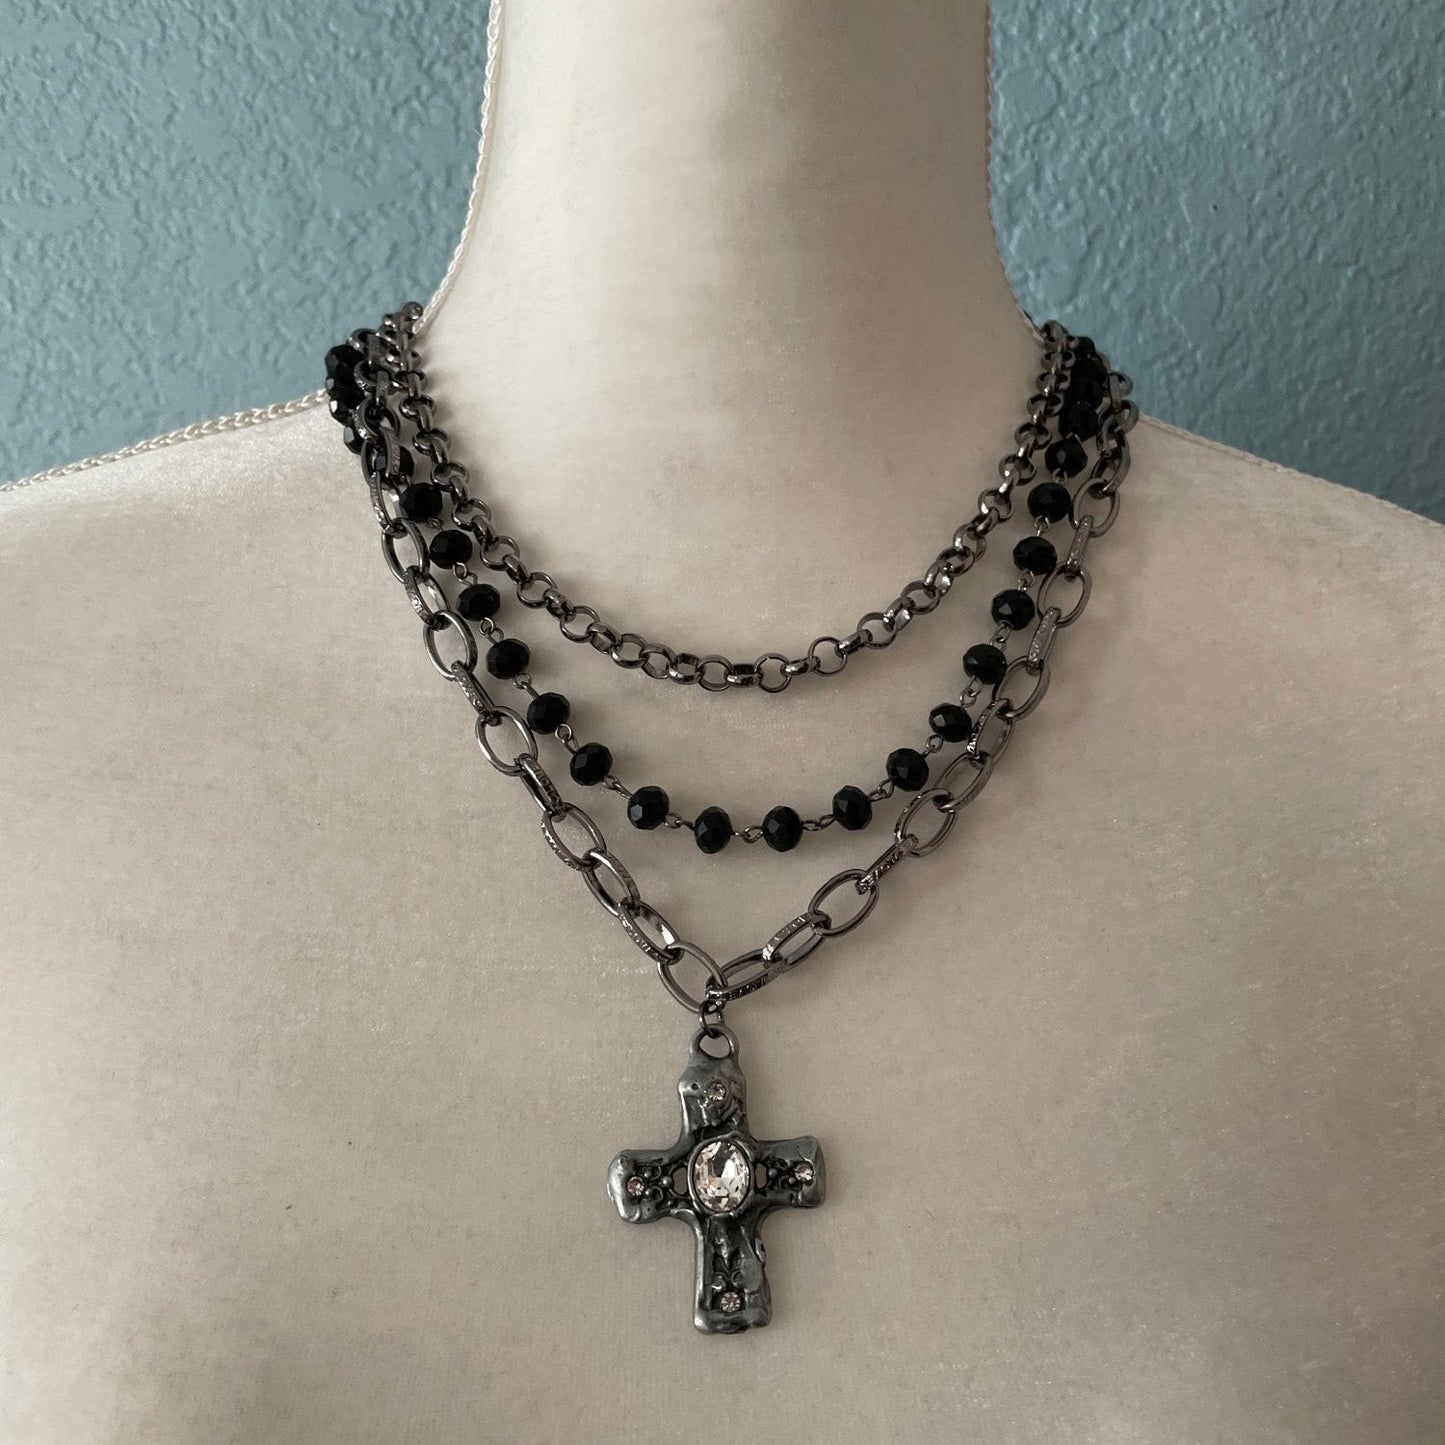 Crystal Chain Cross Pendant Necklaces